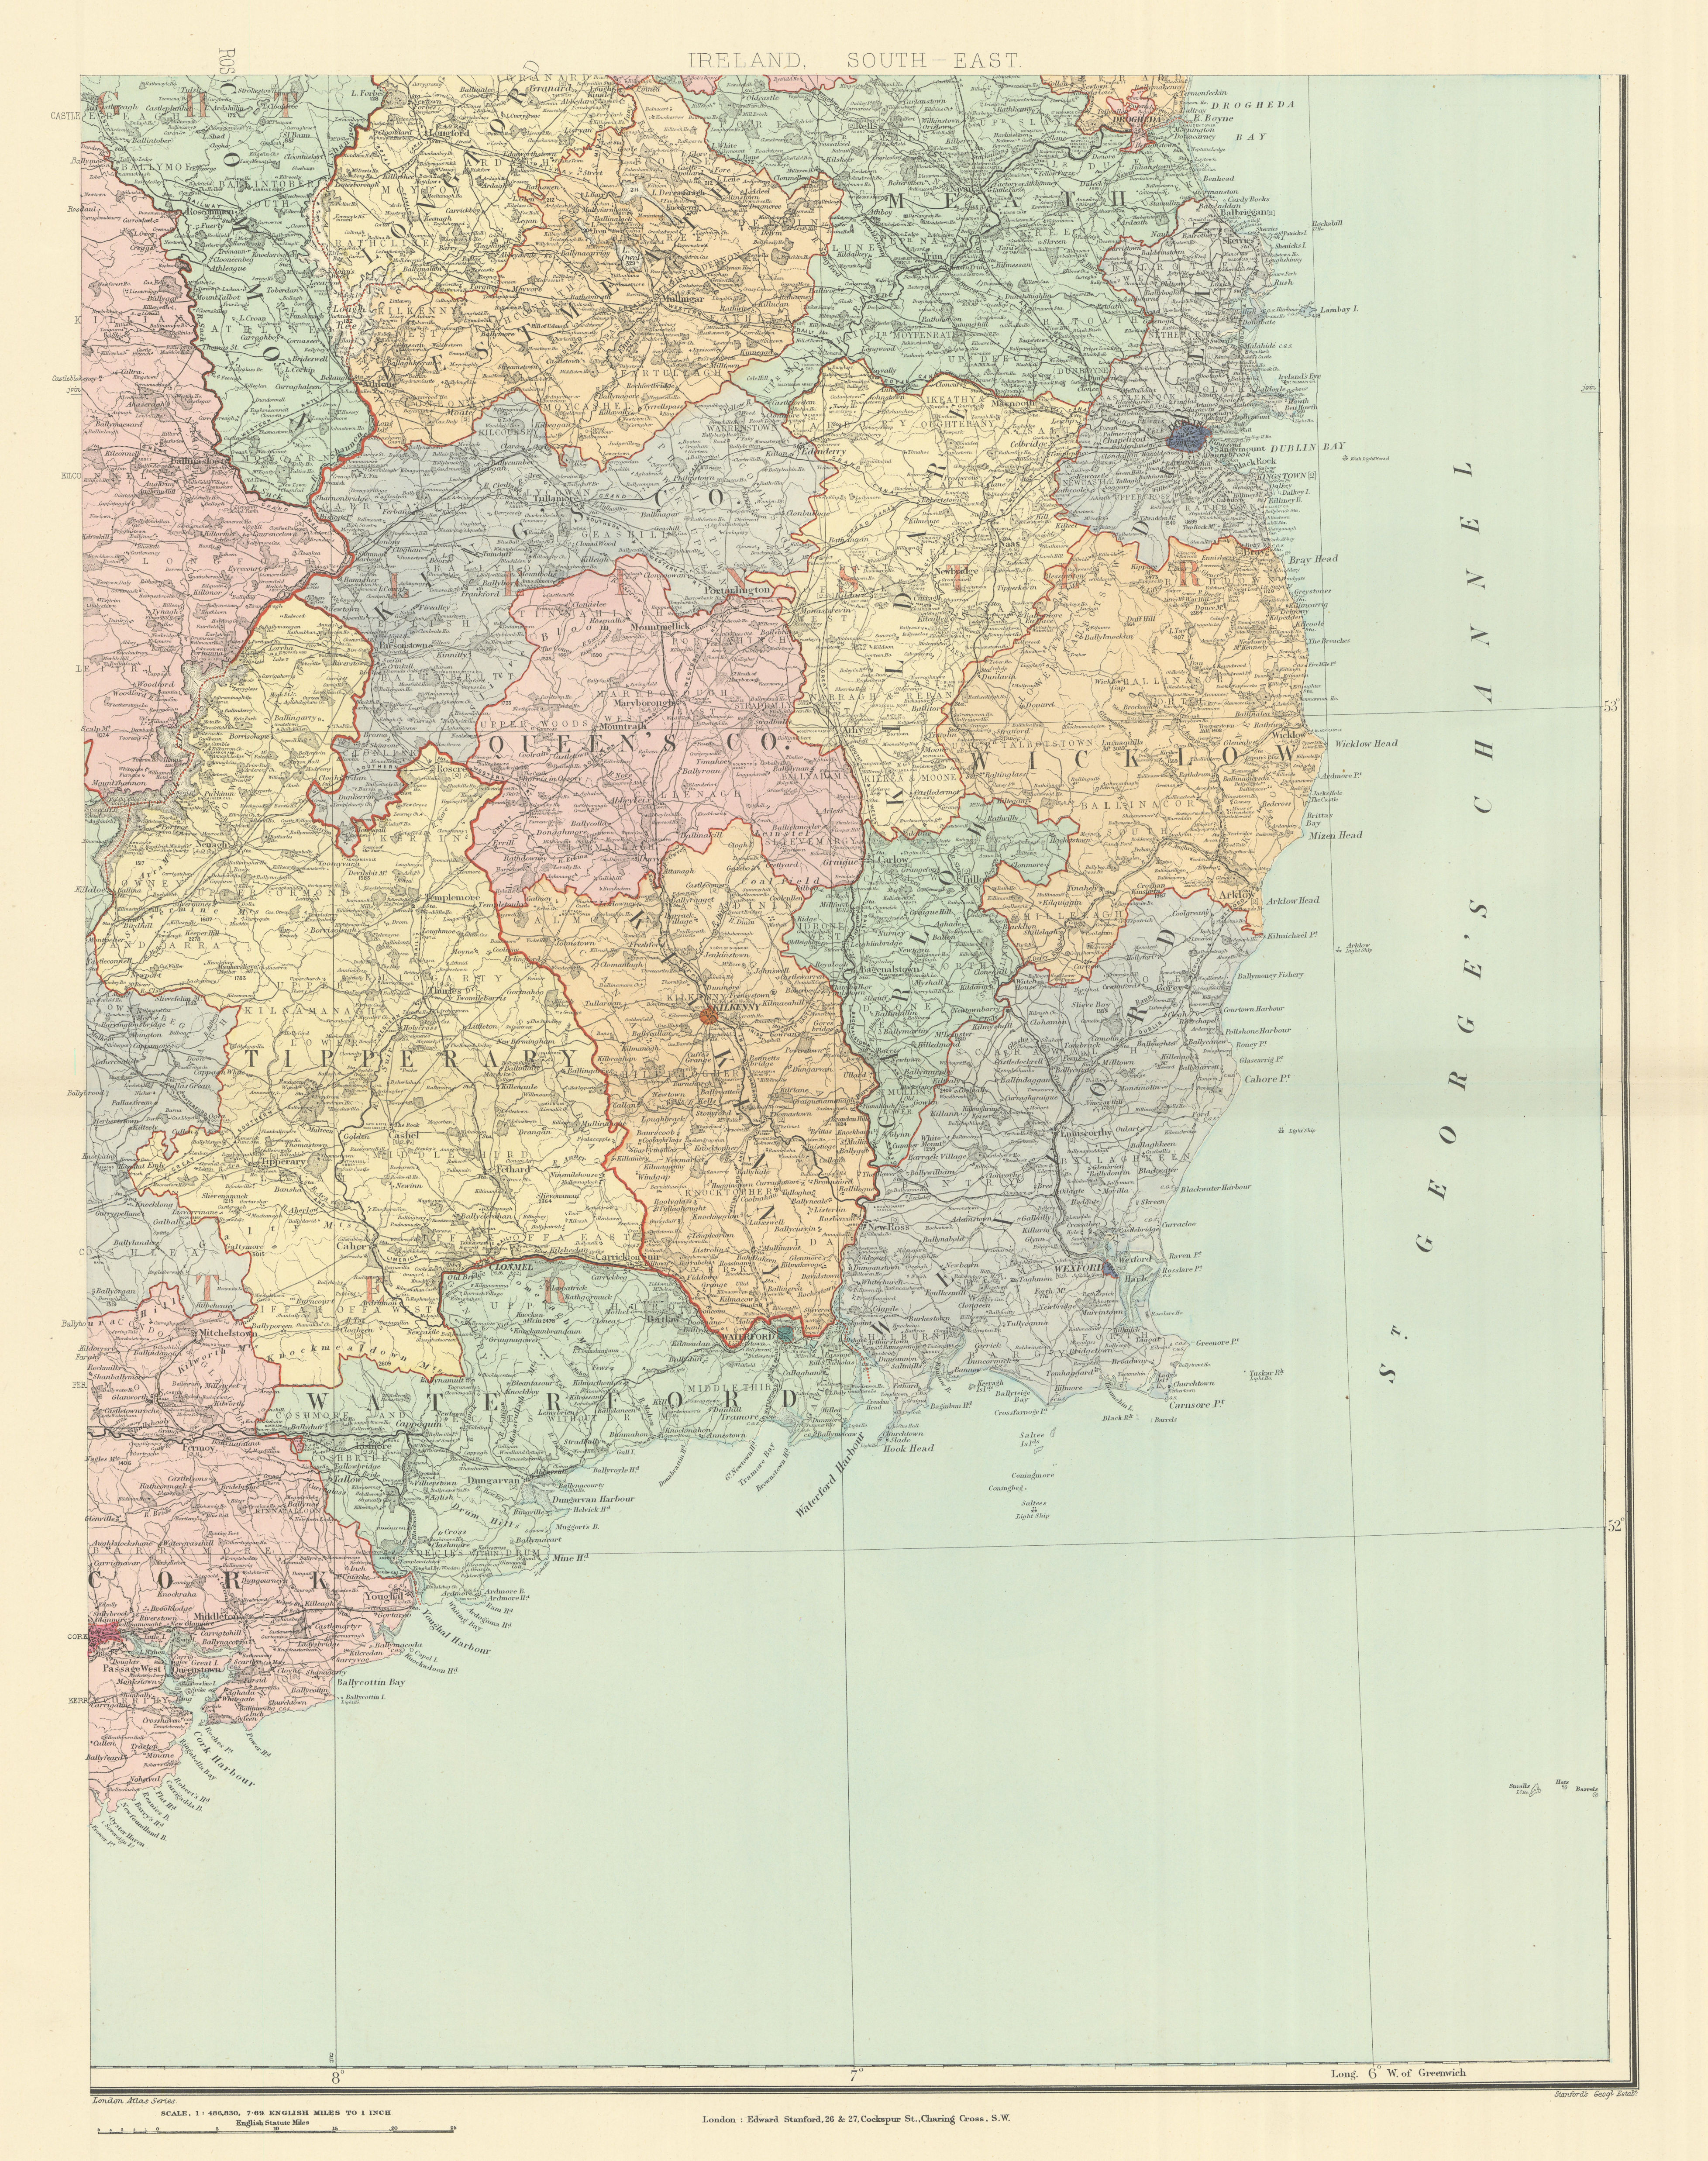 Associate Product Ireland south-east Leinster Kildare Wicklow Dublin Tipperary. STANFORD 1894 map